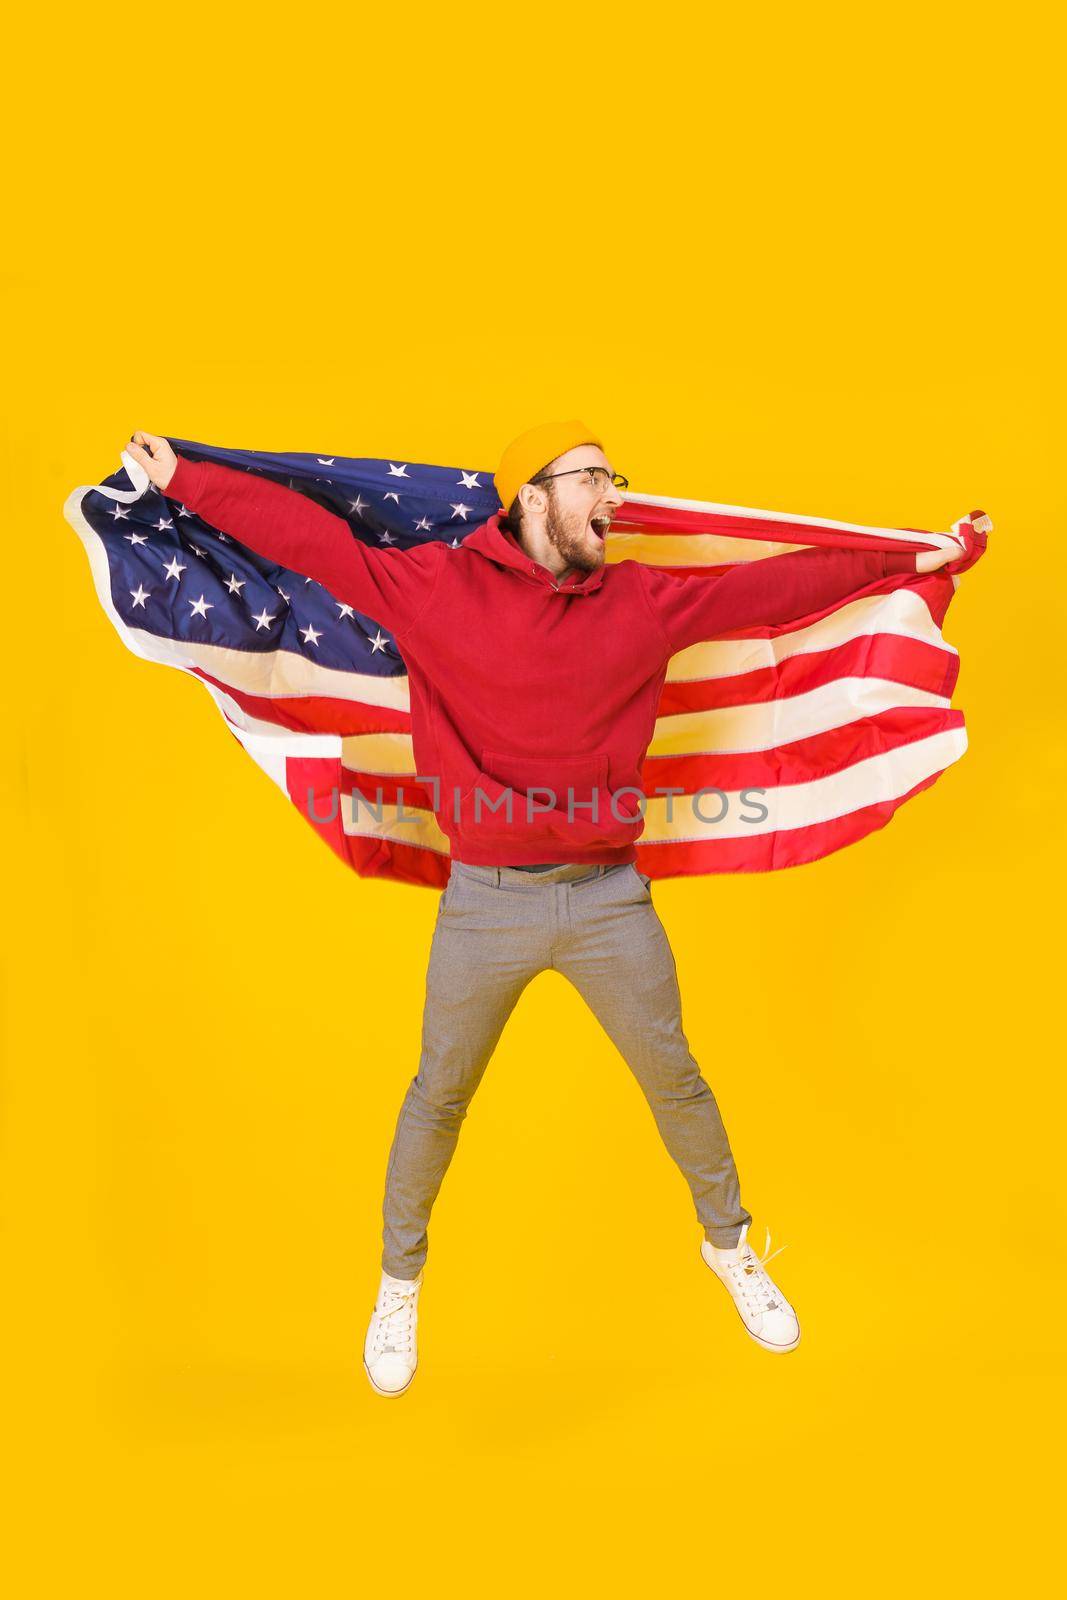 Happy 4th july, handsome young man celebrates jumping hight with USA flag behind his back isolated on yellow background. Freedom is in your life. Cheerful young man with American flag.